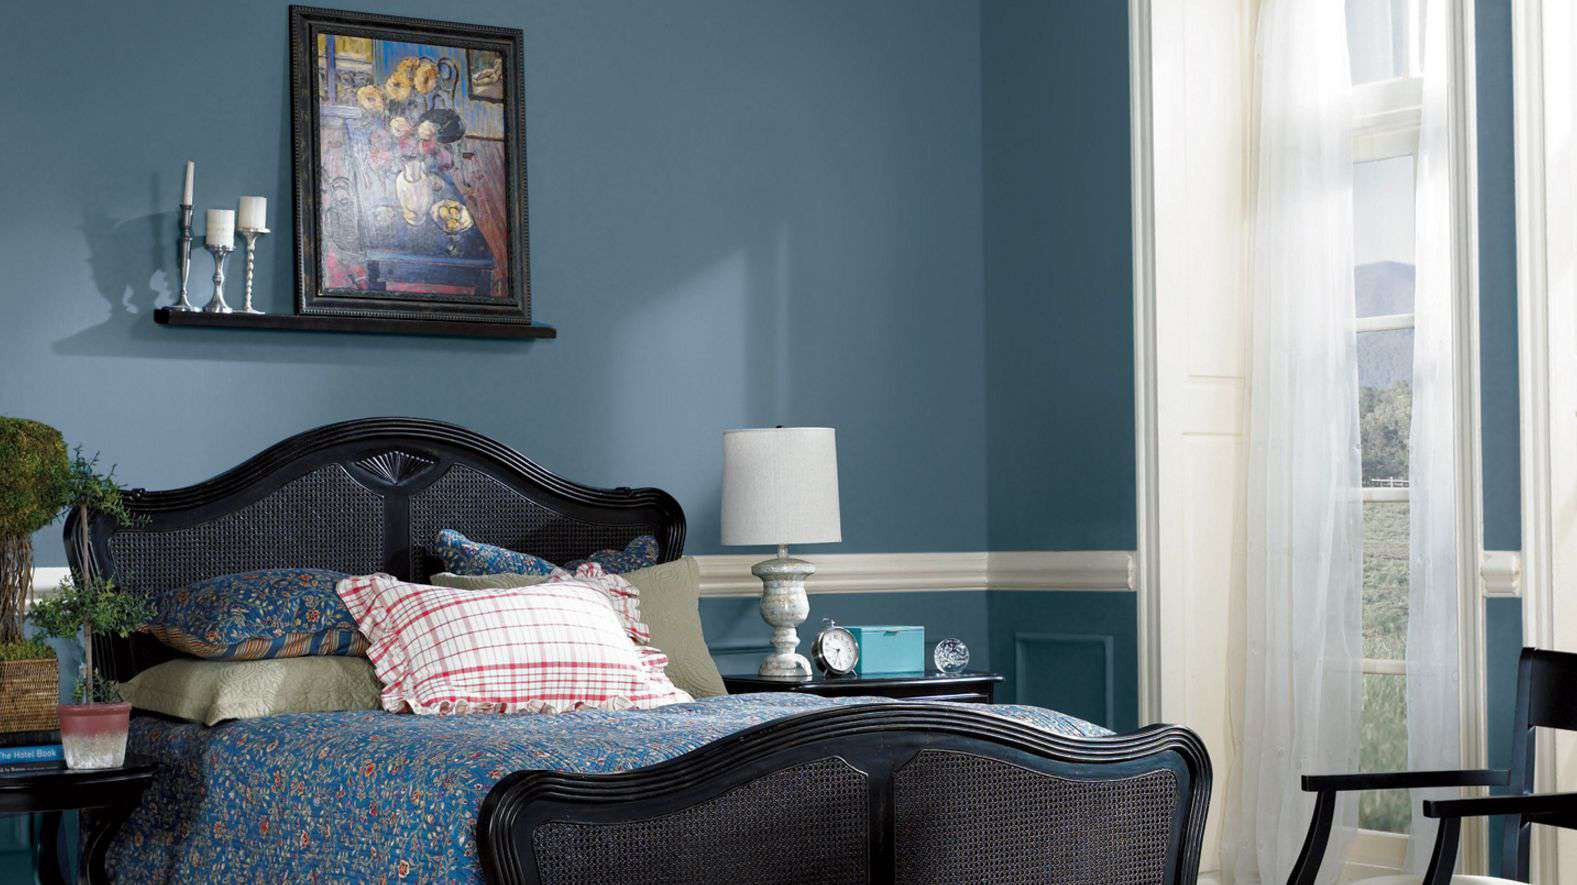 Blue Bedroom Paint Color
 Bedroom Paint Colors 15 Palettes You Can Use